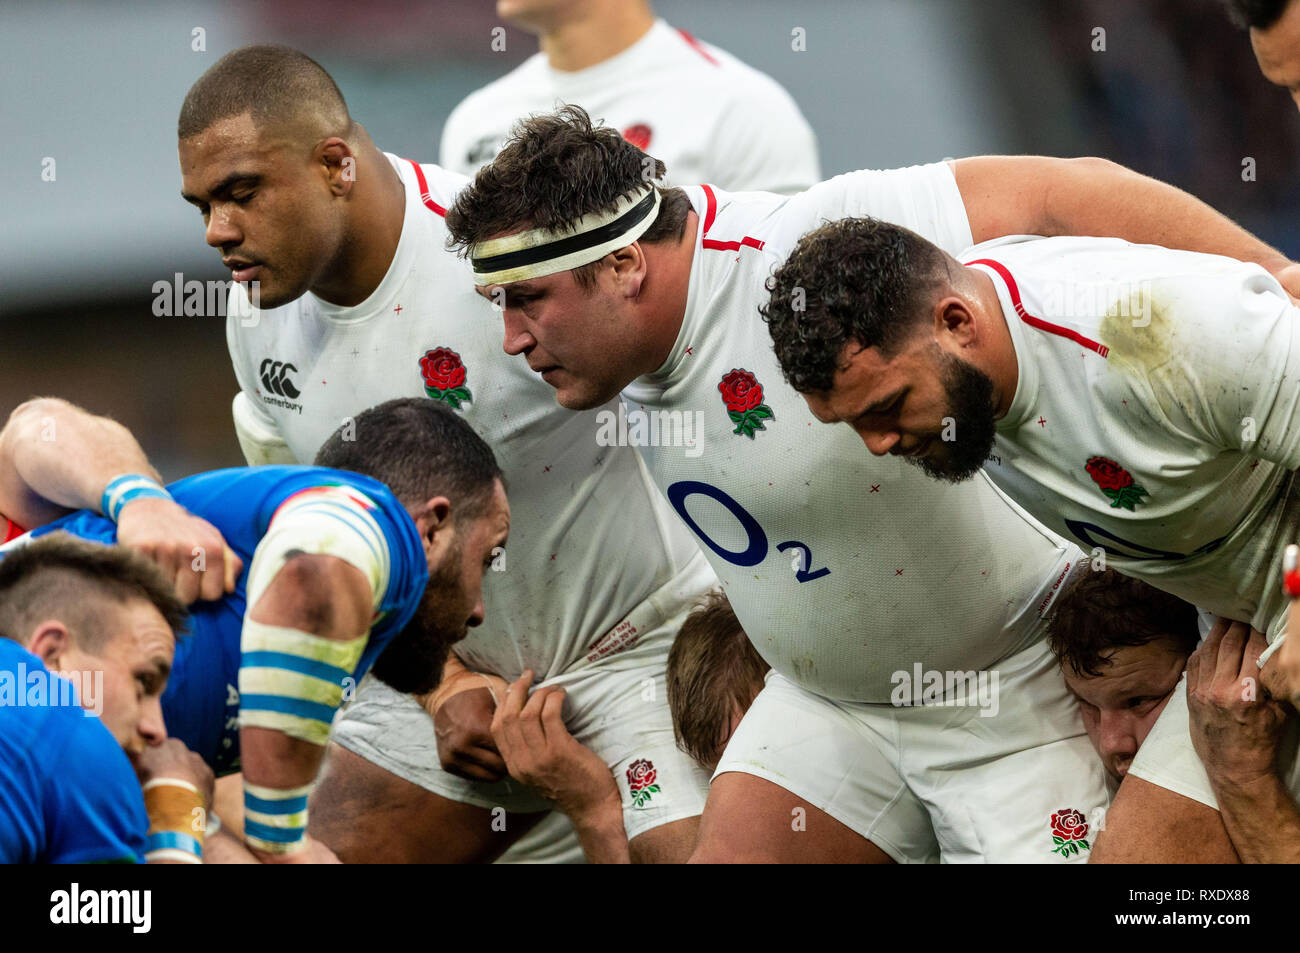 Twickenham, London, UK. 9th March 2019. 09/03/2019 England's front row of  Ellis Genge of England, Jamie George of England and Kyle Sinckler of  England get ready to scrum down during the Guinness